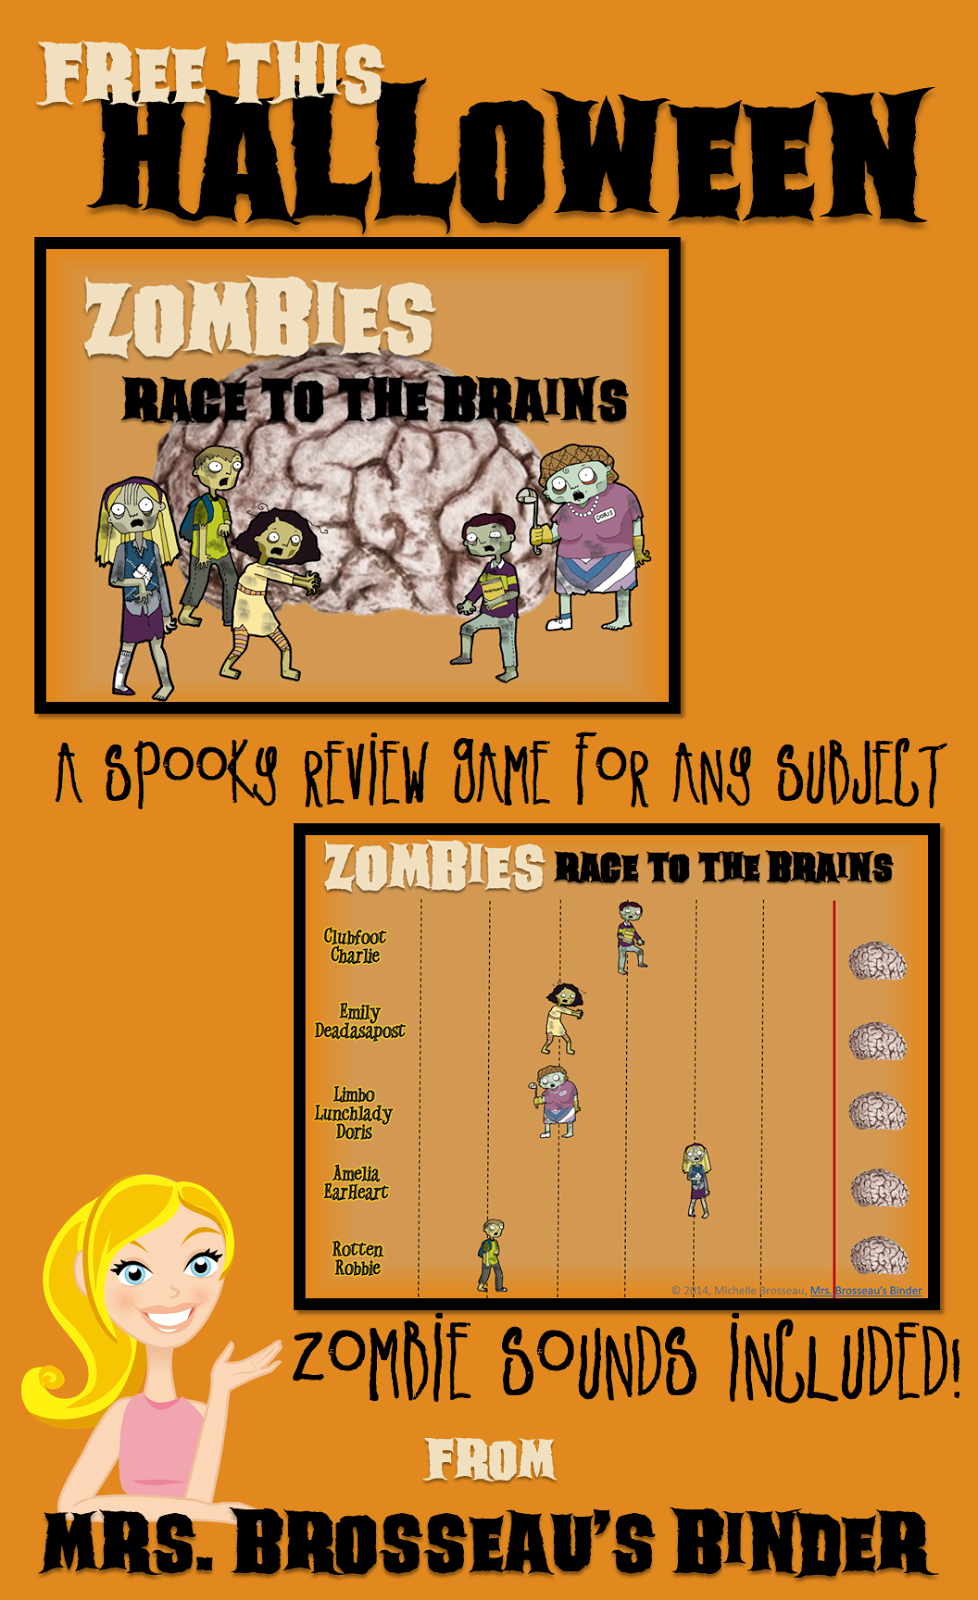 http://www.teacherspayteachers.com/Product/Zombies-Race-to-the-Brains-Halloween-PowerPoint-Review-Game-for-ANY-Subject-1484808